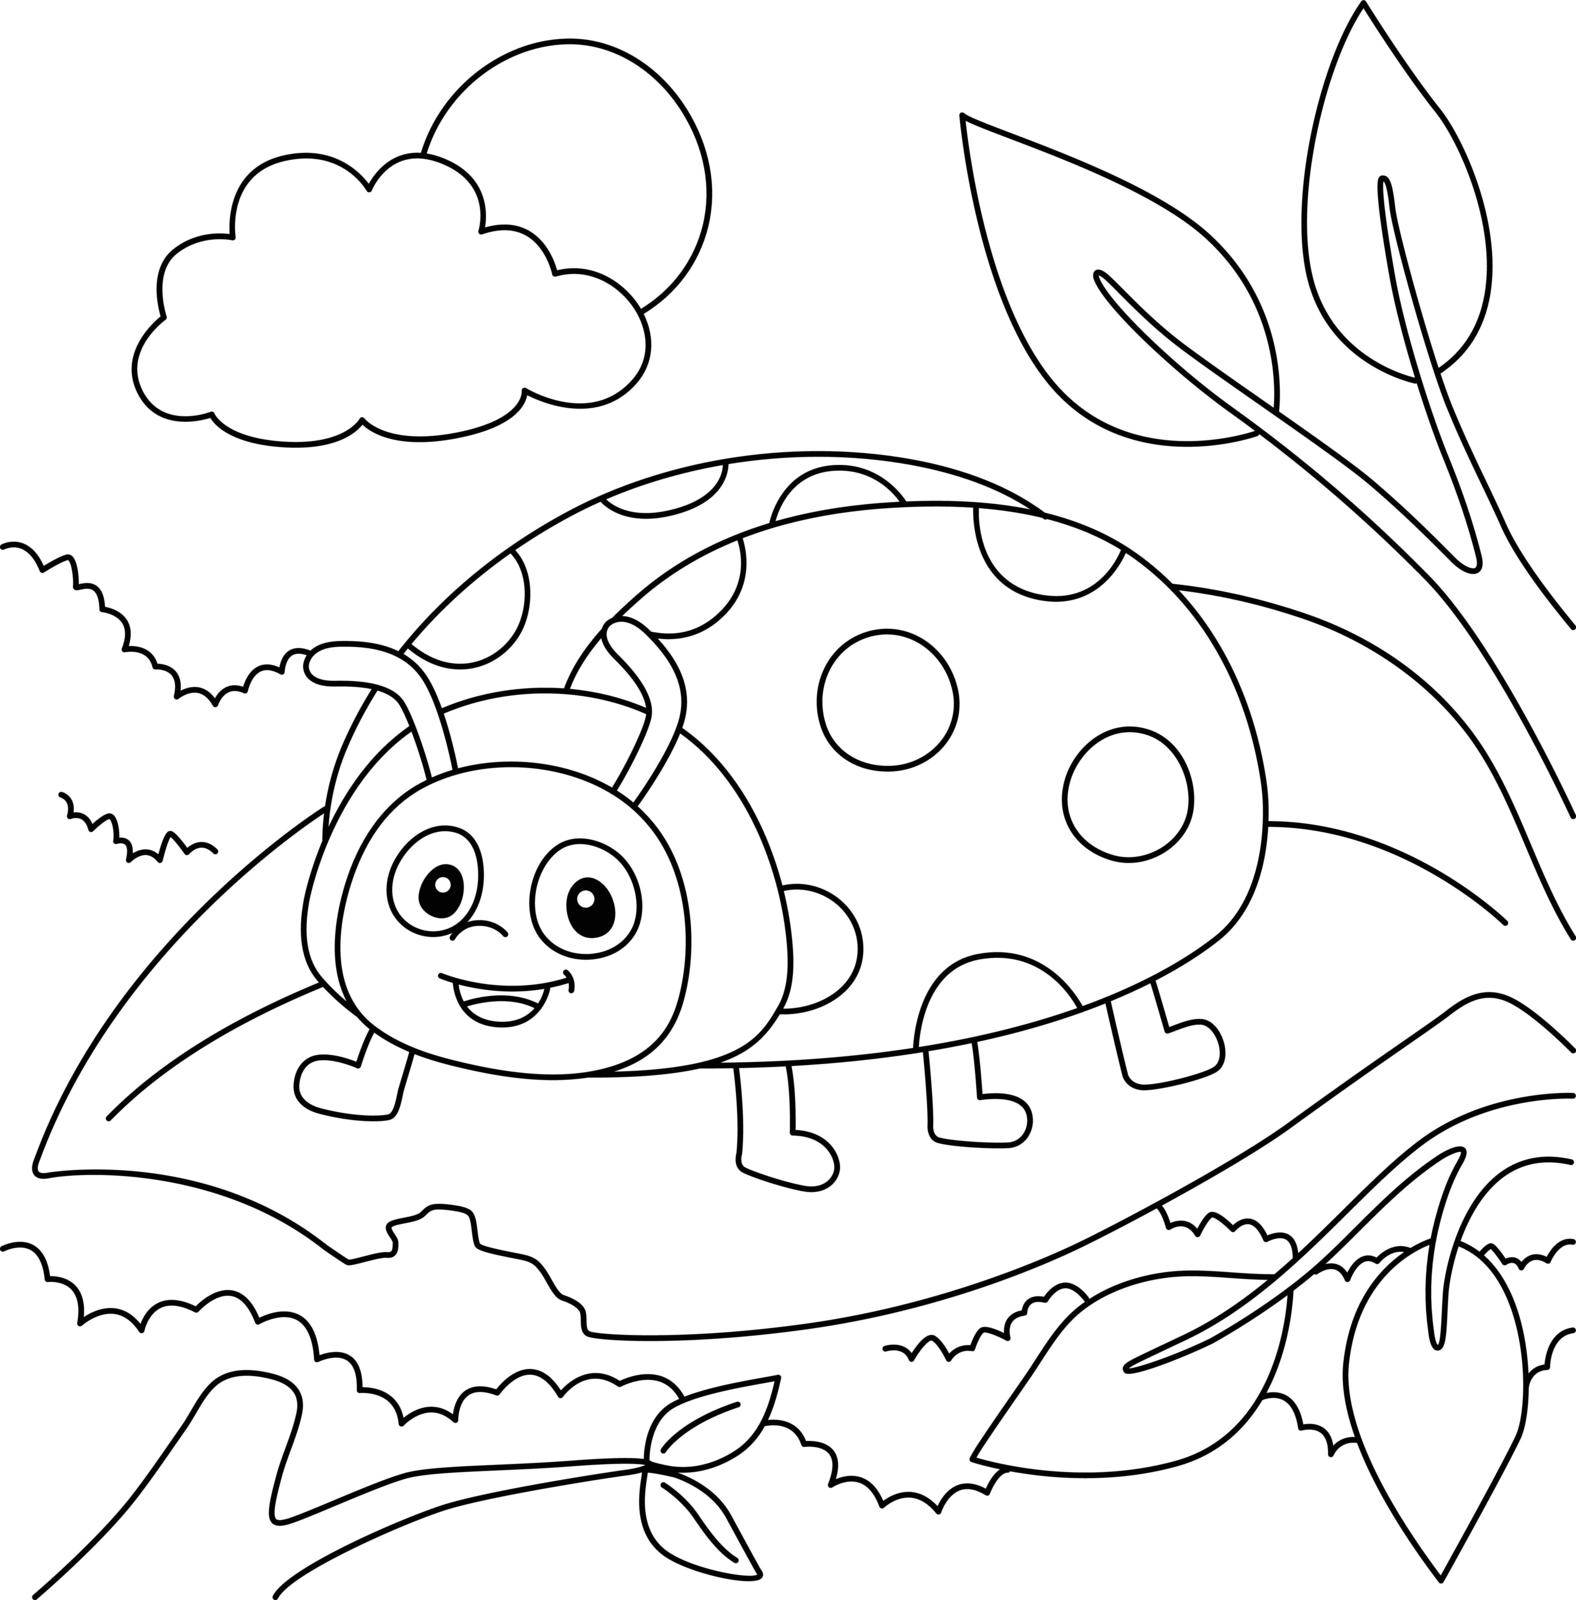 A cute and funny coloring page of a ladybug farm animal. Provides hours of coloring fun for children. To color, this page is very easy. Suitable for little kids and toddlers.